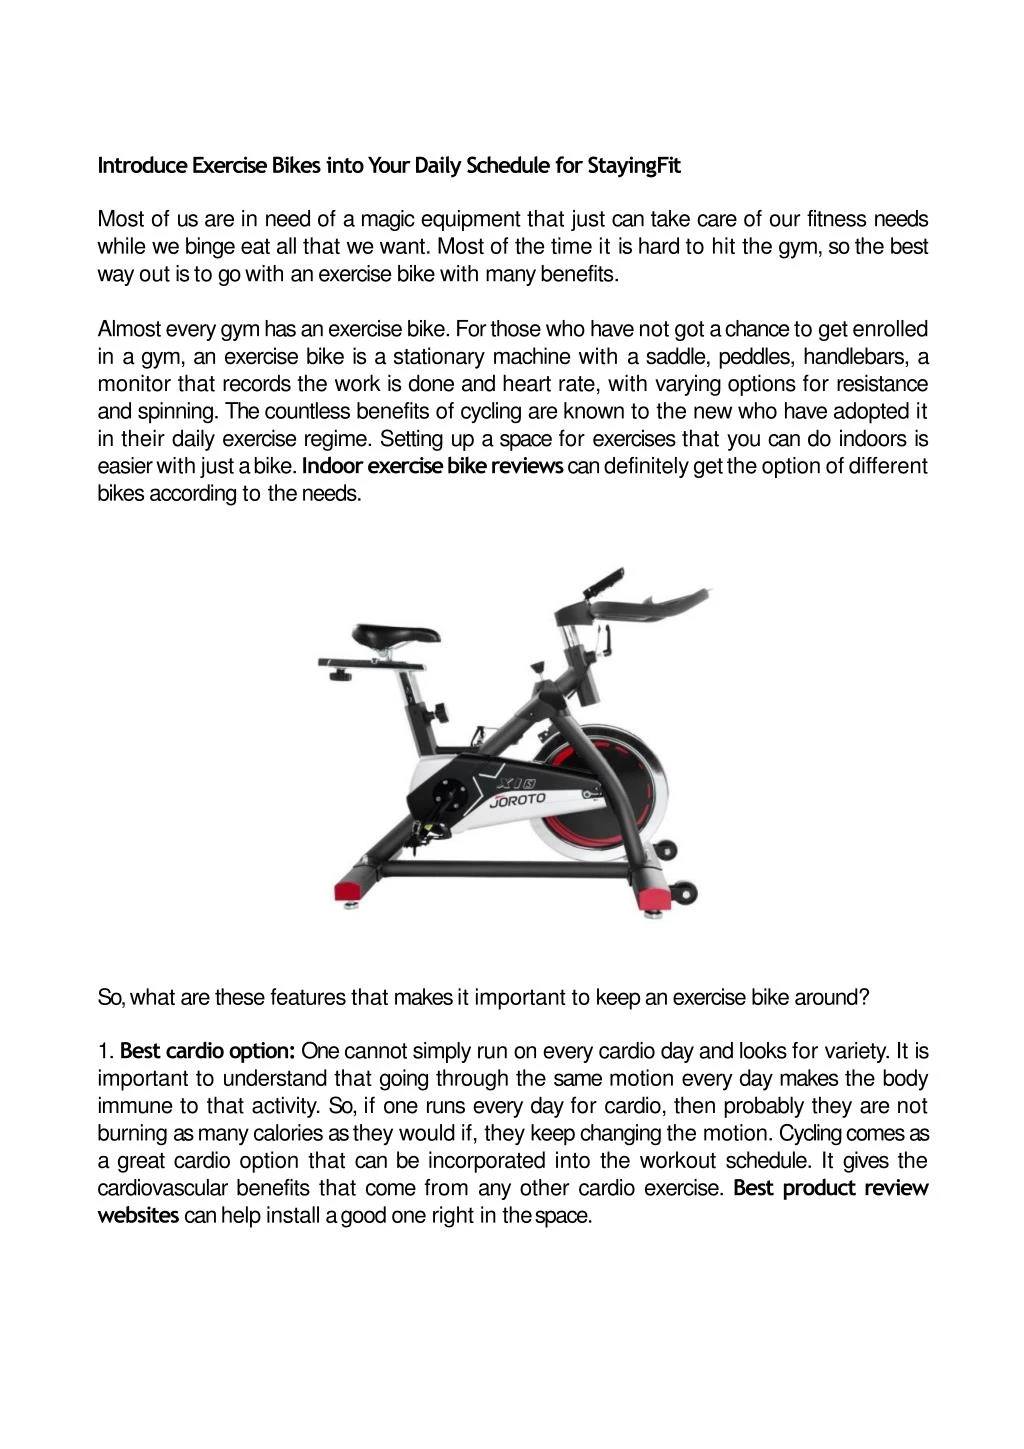 introduce exercise bikes into your daily schedule